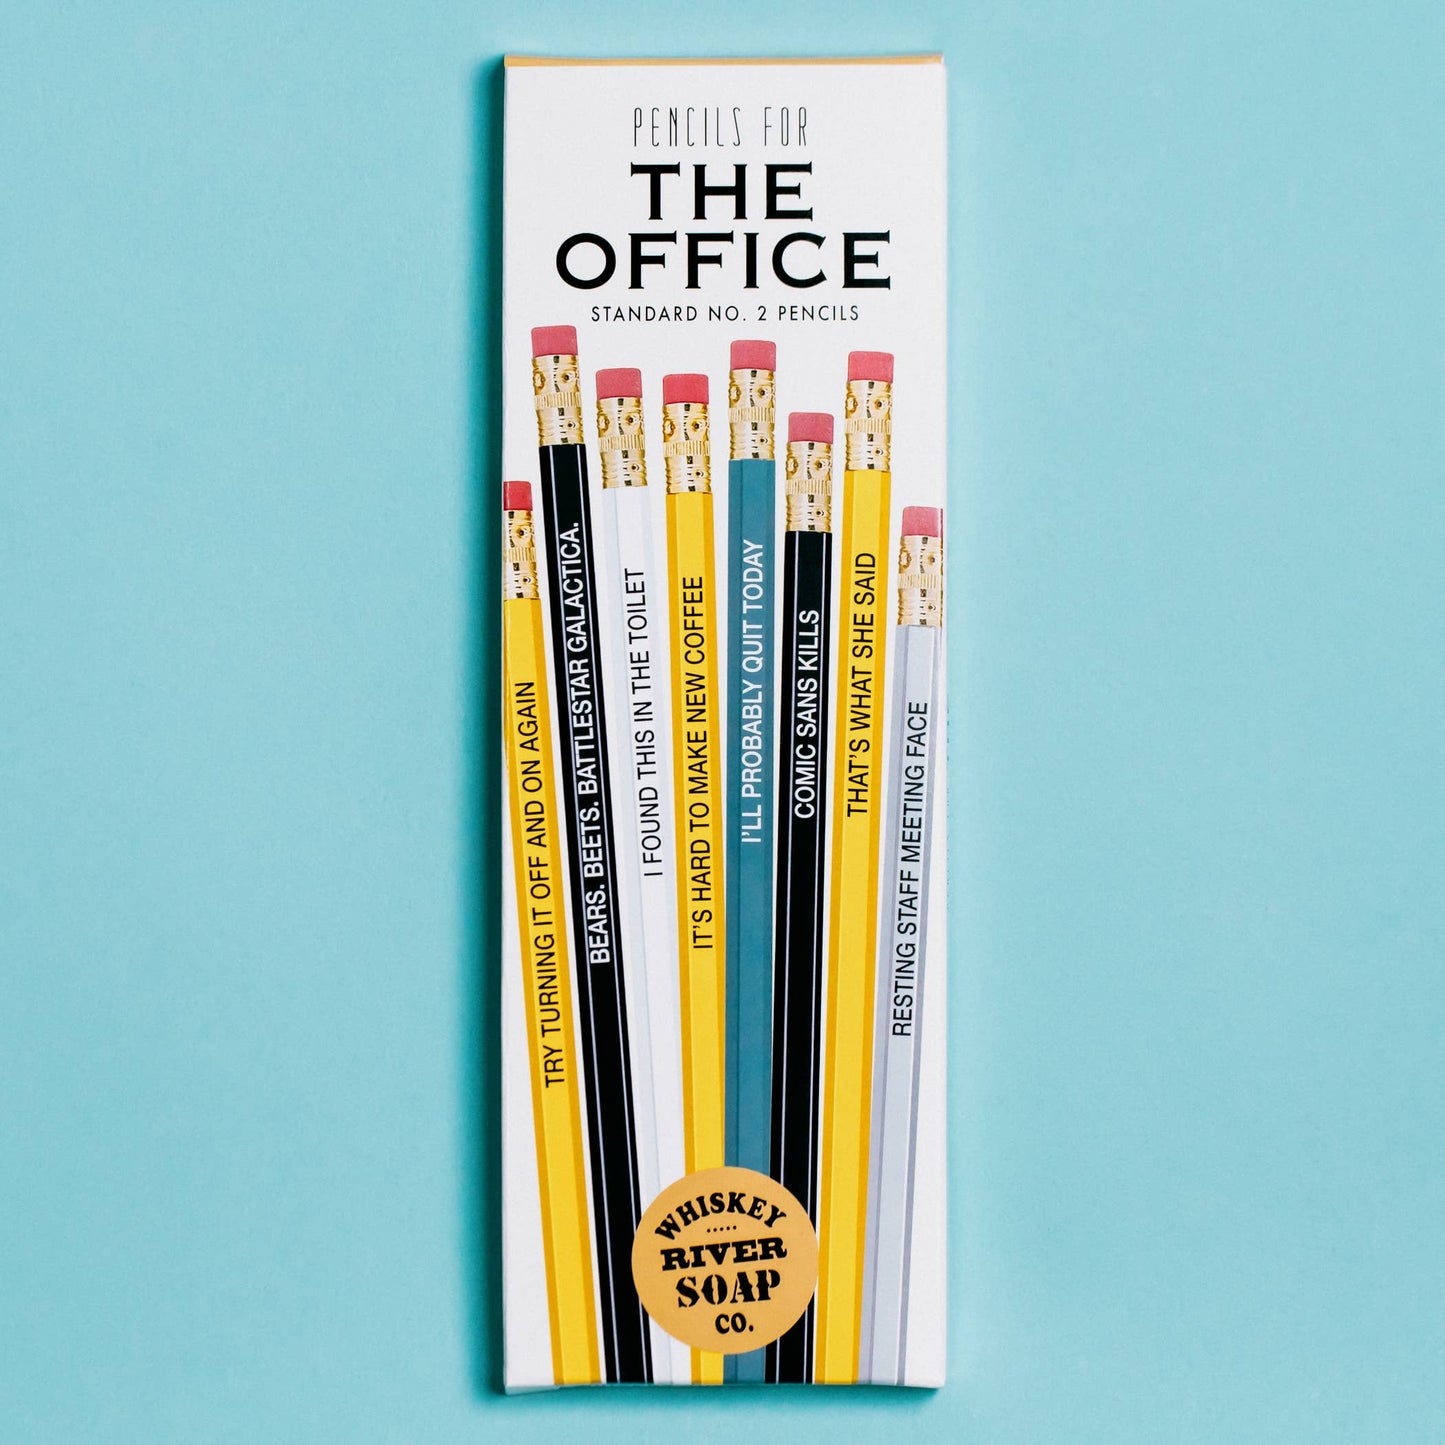 Pencils for The Office Original Style | Funny Pencils